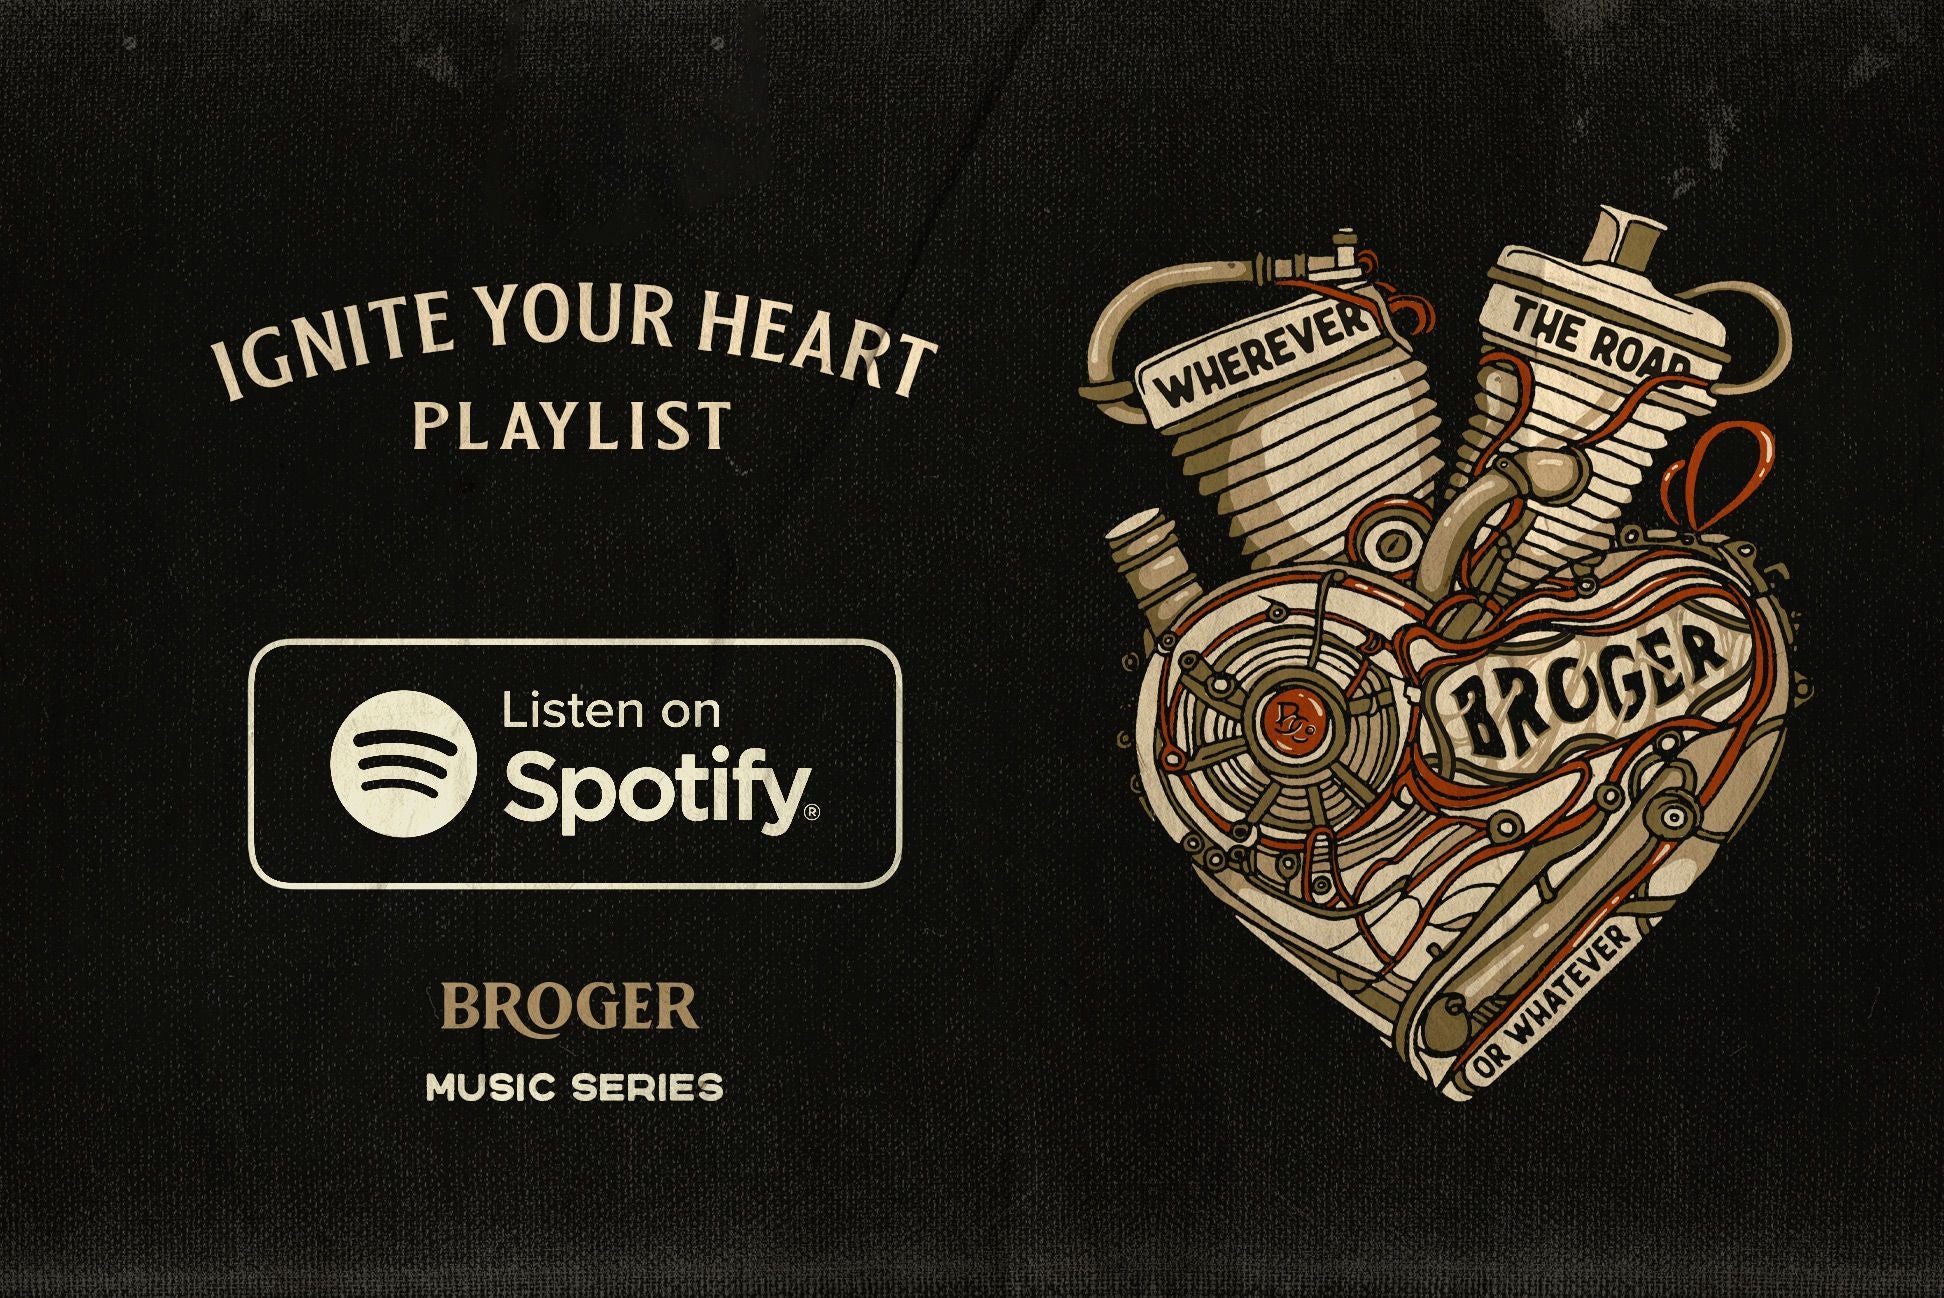 Ignite Your Heart - Playlist